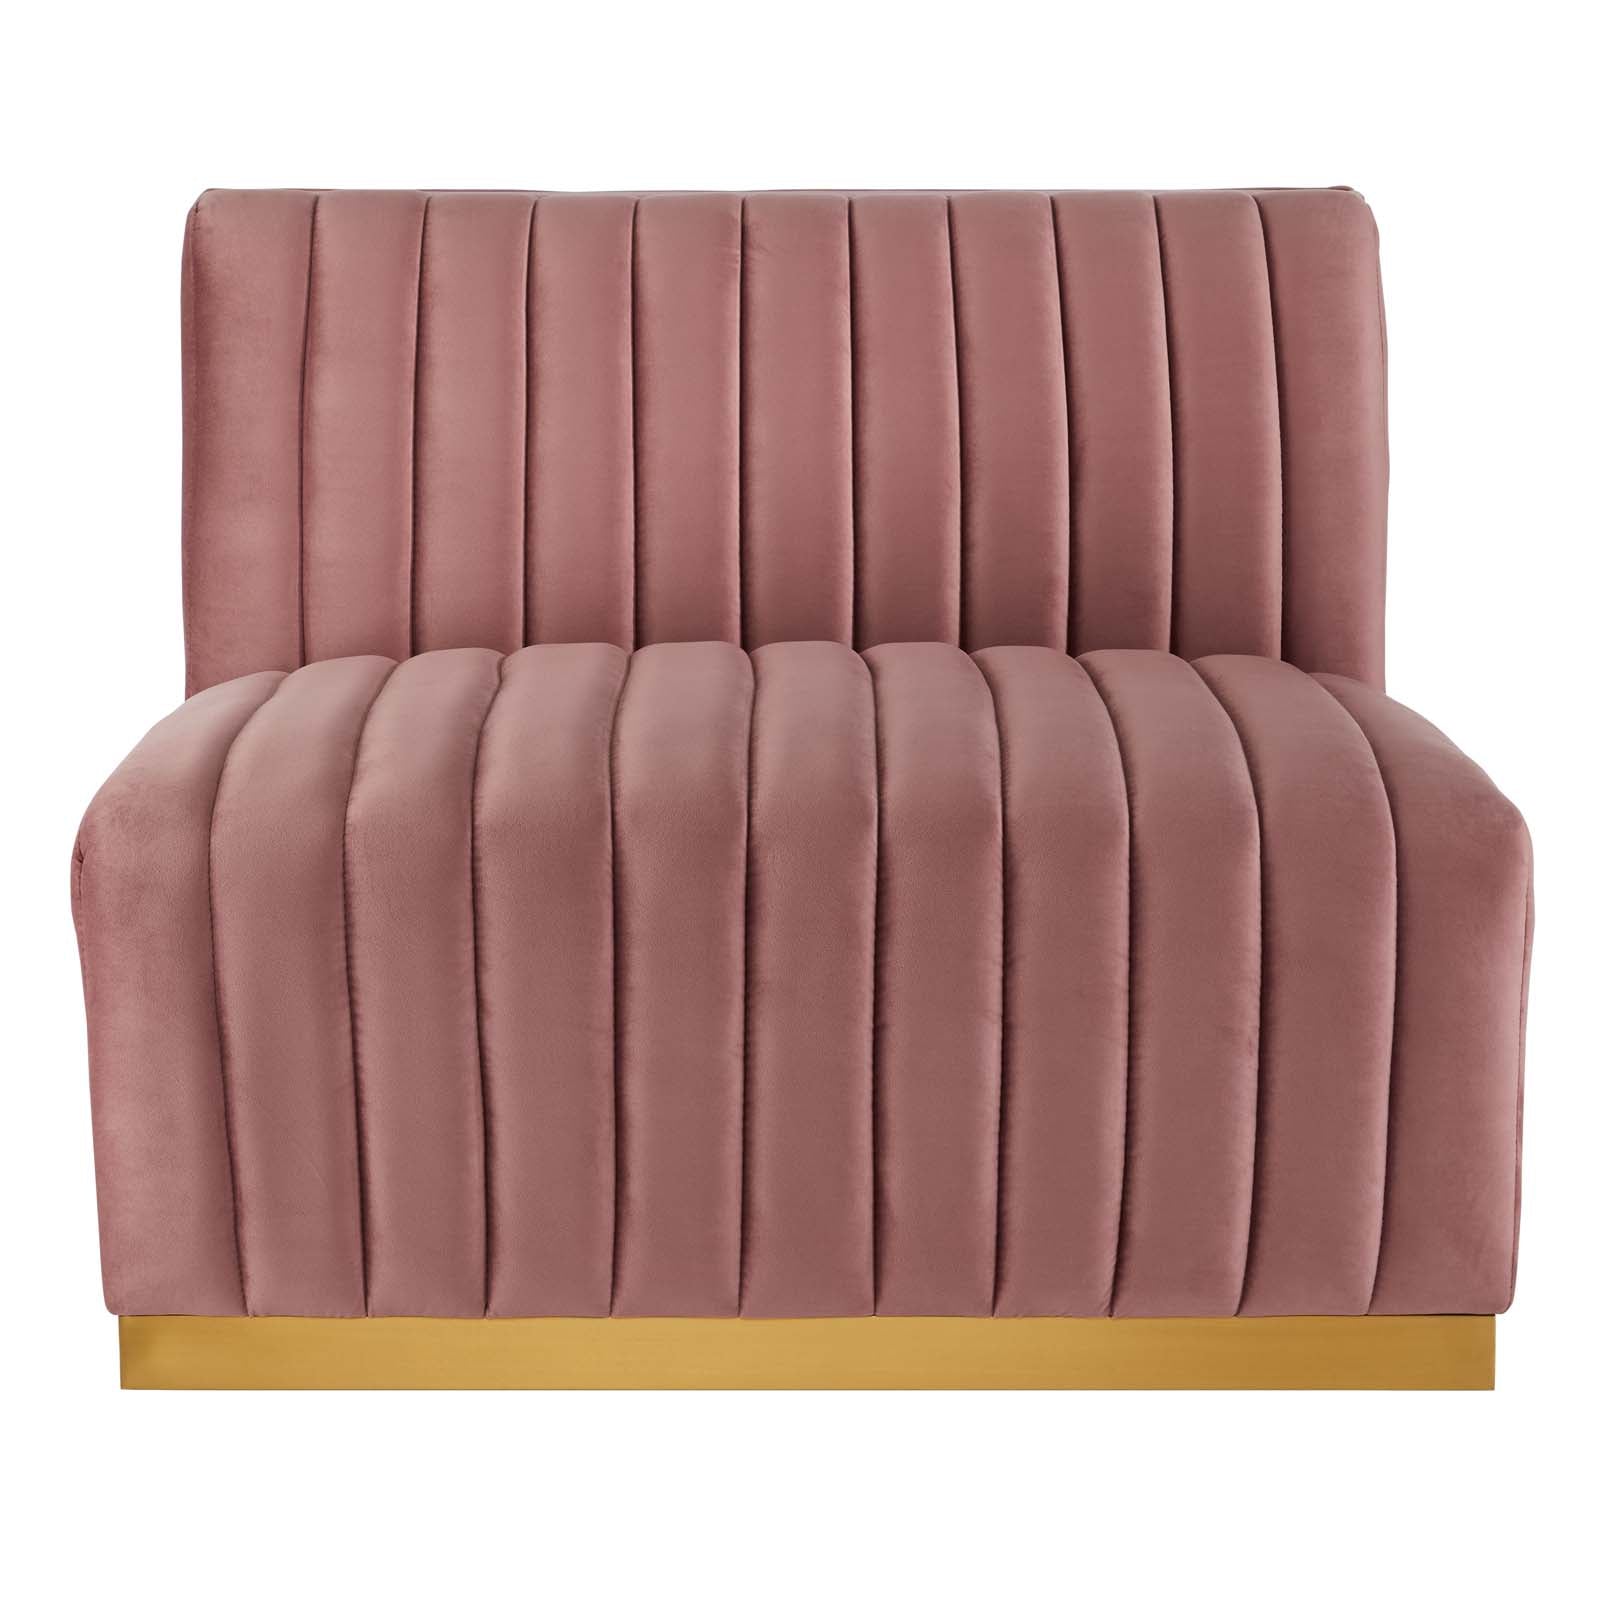 Modway Sectional Sofas - Conjure Channel Tufted Performance Velvet 6 Piece U-Shaped Sectional Gold | Dusty Rose